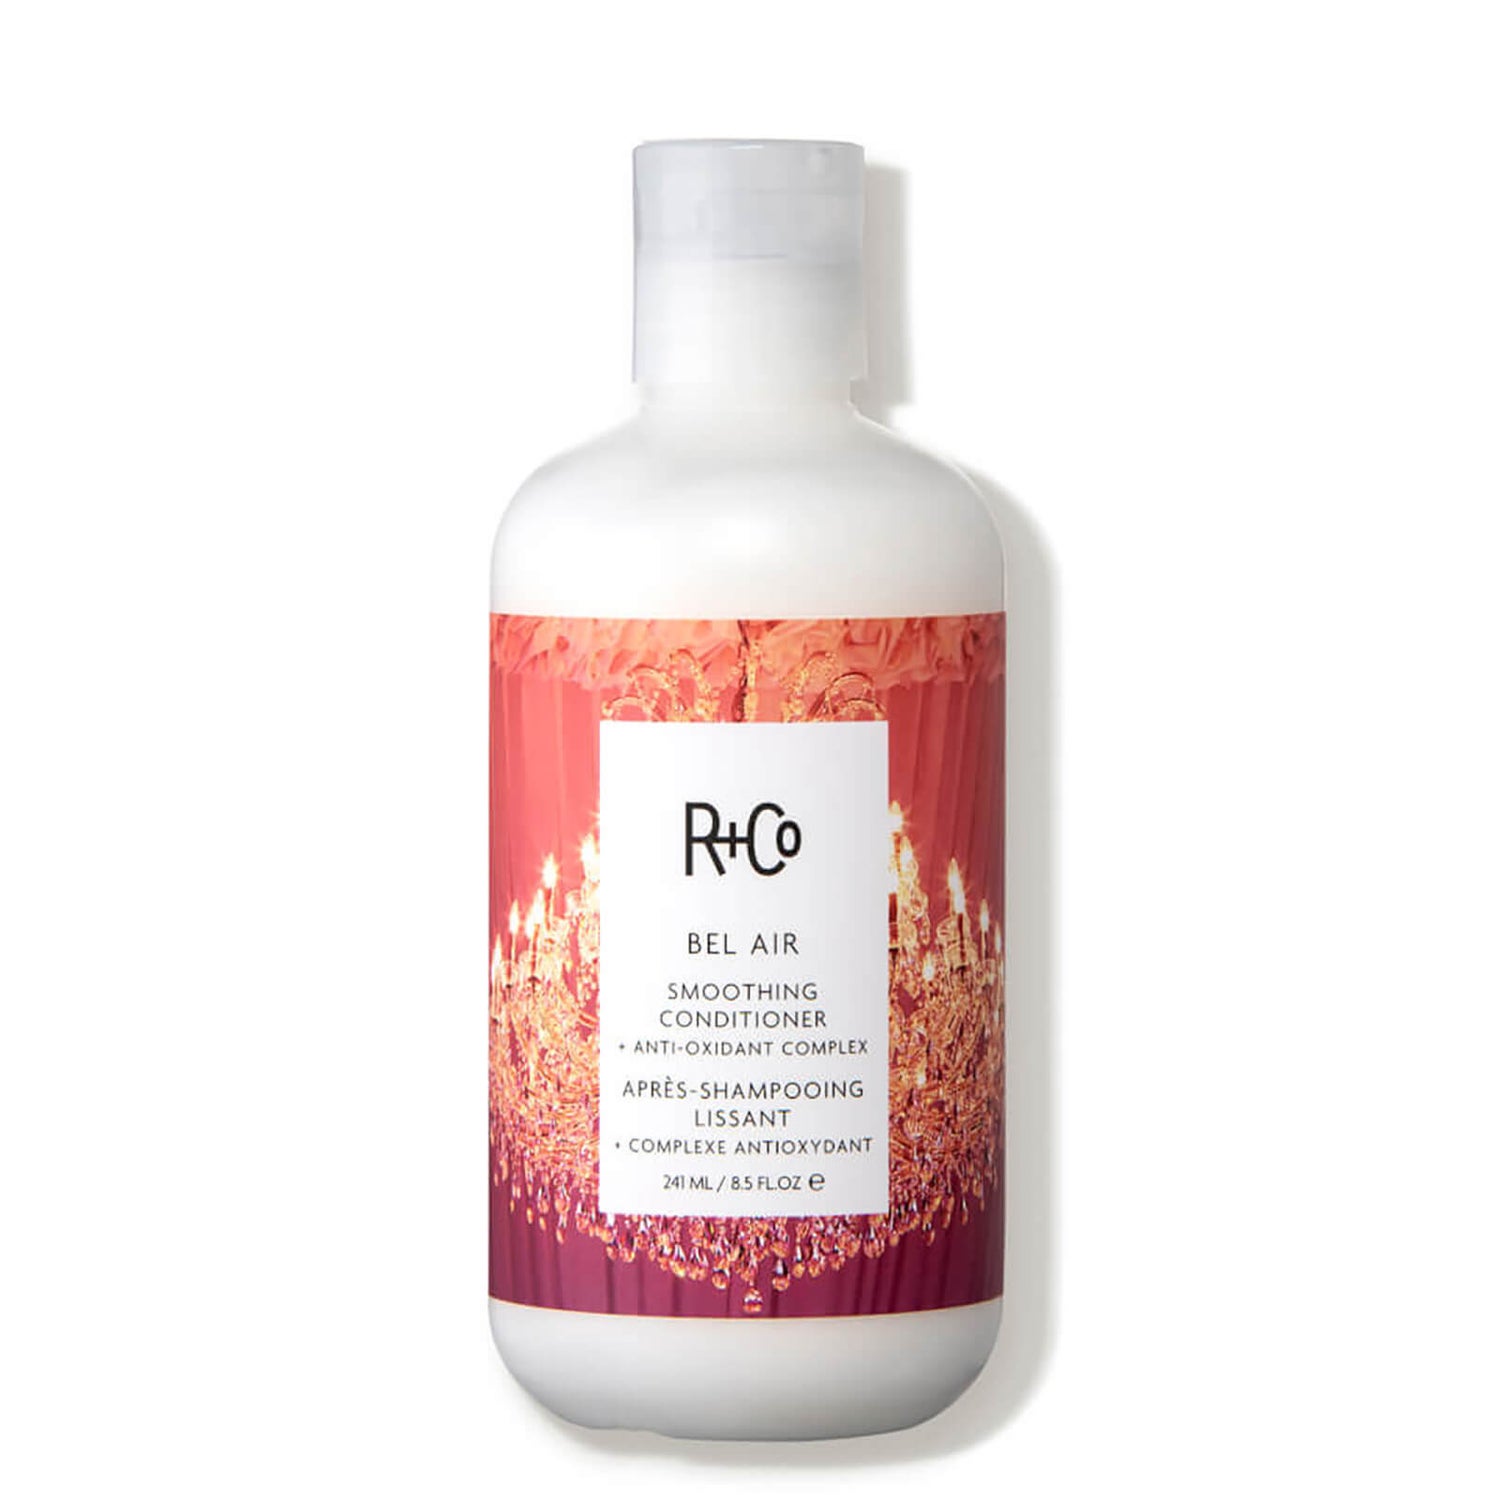 R+Co BEL AIR Smoothing Conditioner Anti-Oxidant Complex (Various Sizes)